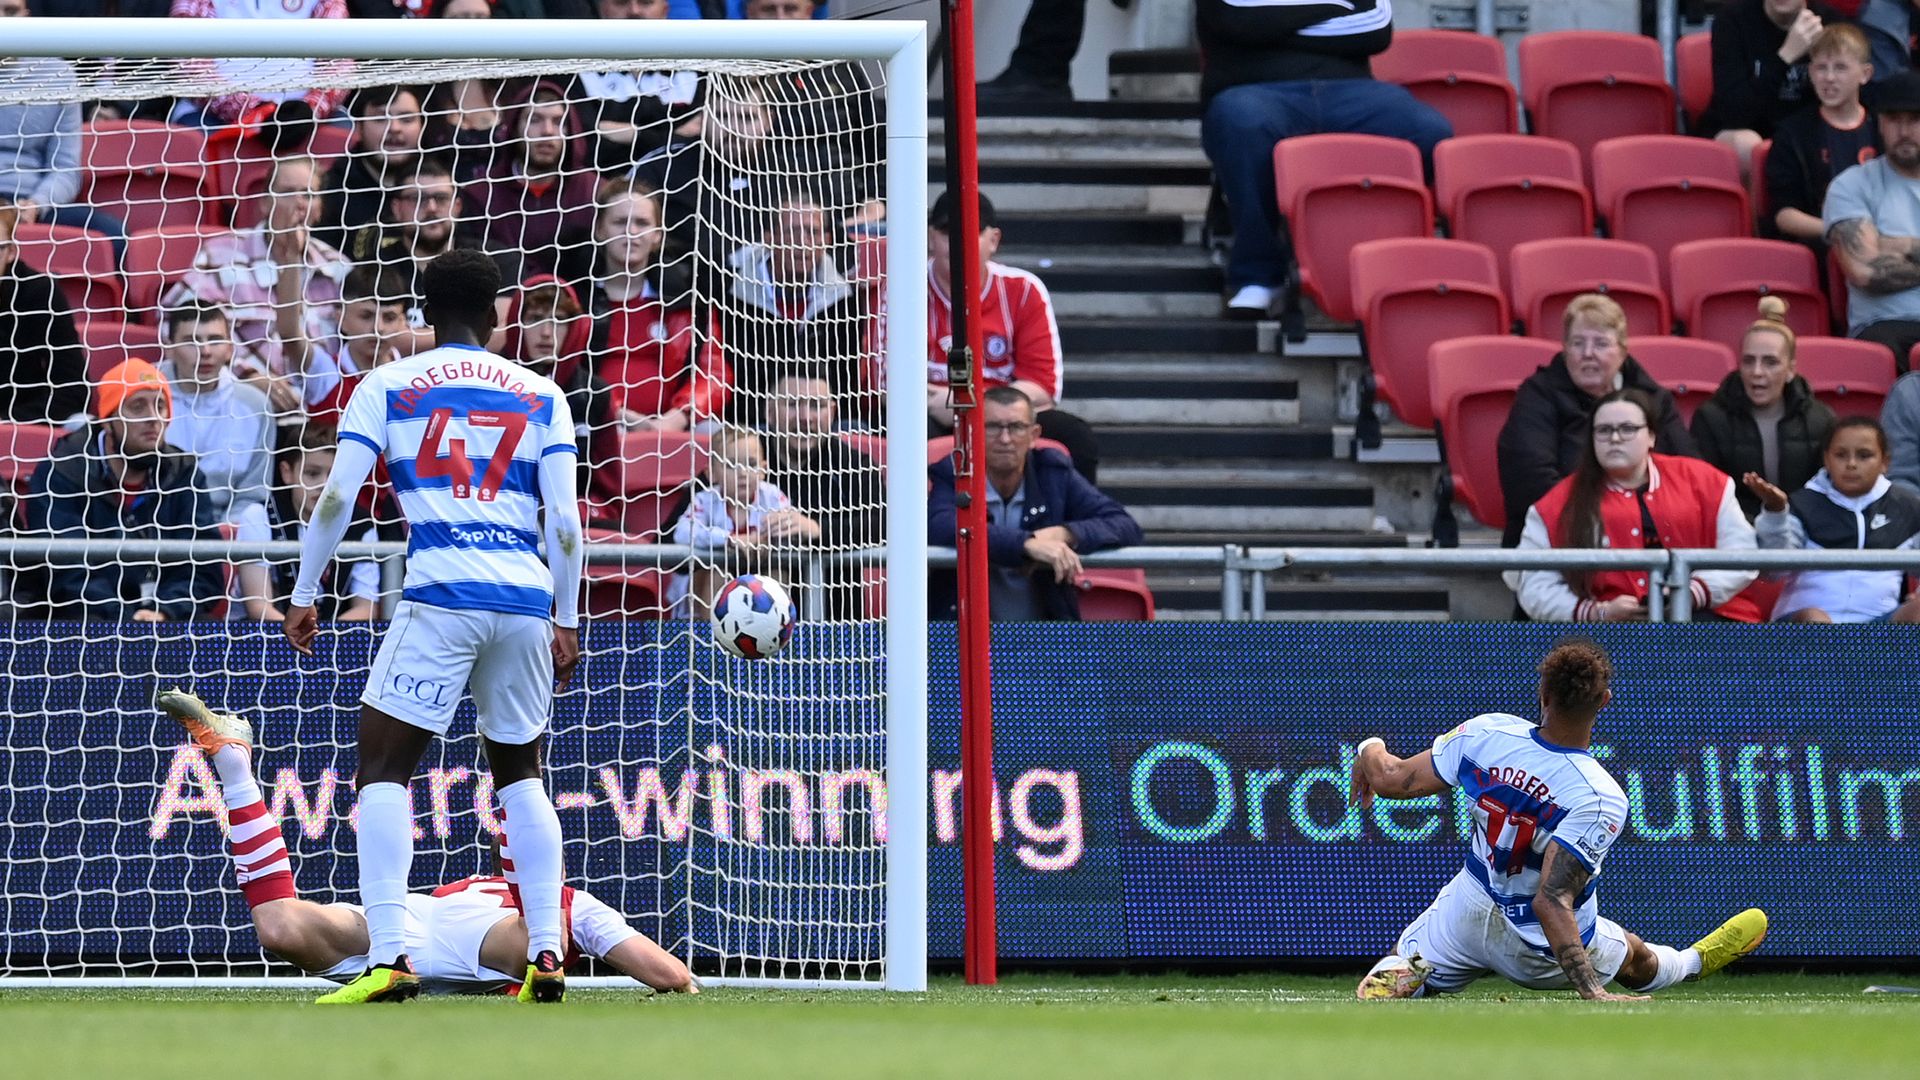 QPR strike early to win at Bristol City